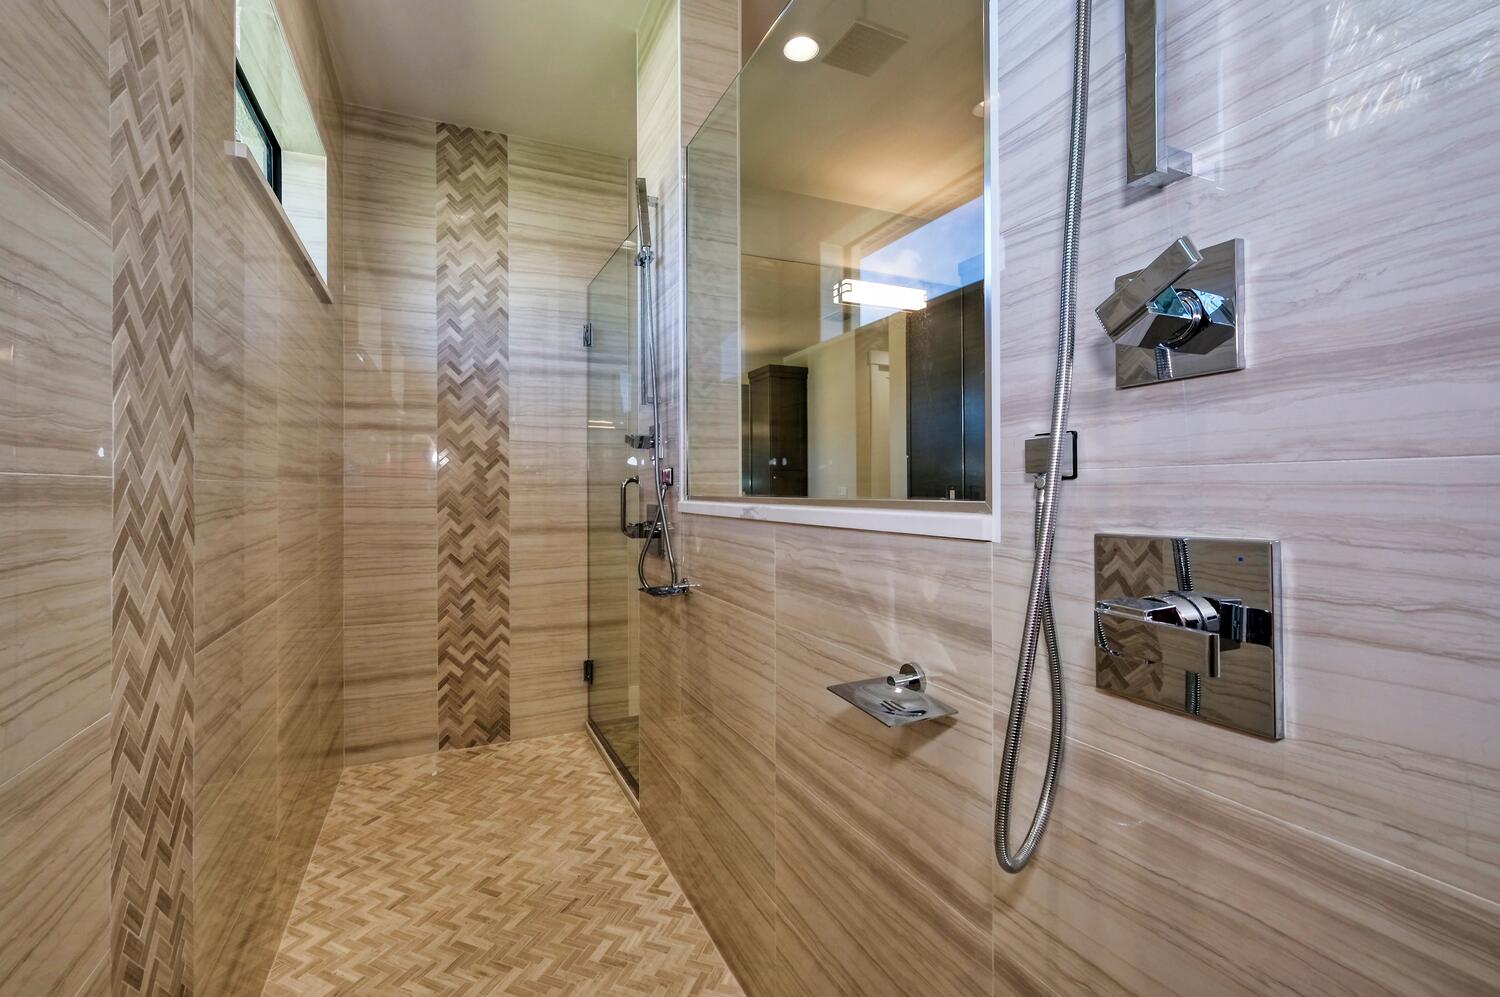 Picture of the shower of the model home Serenity